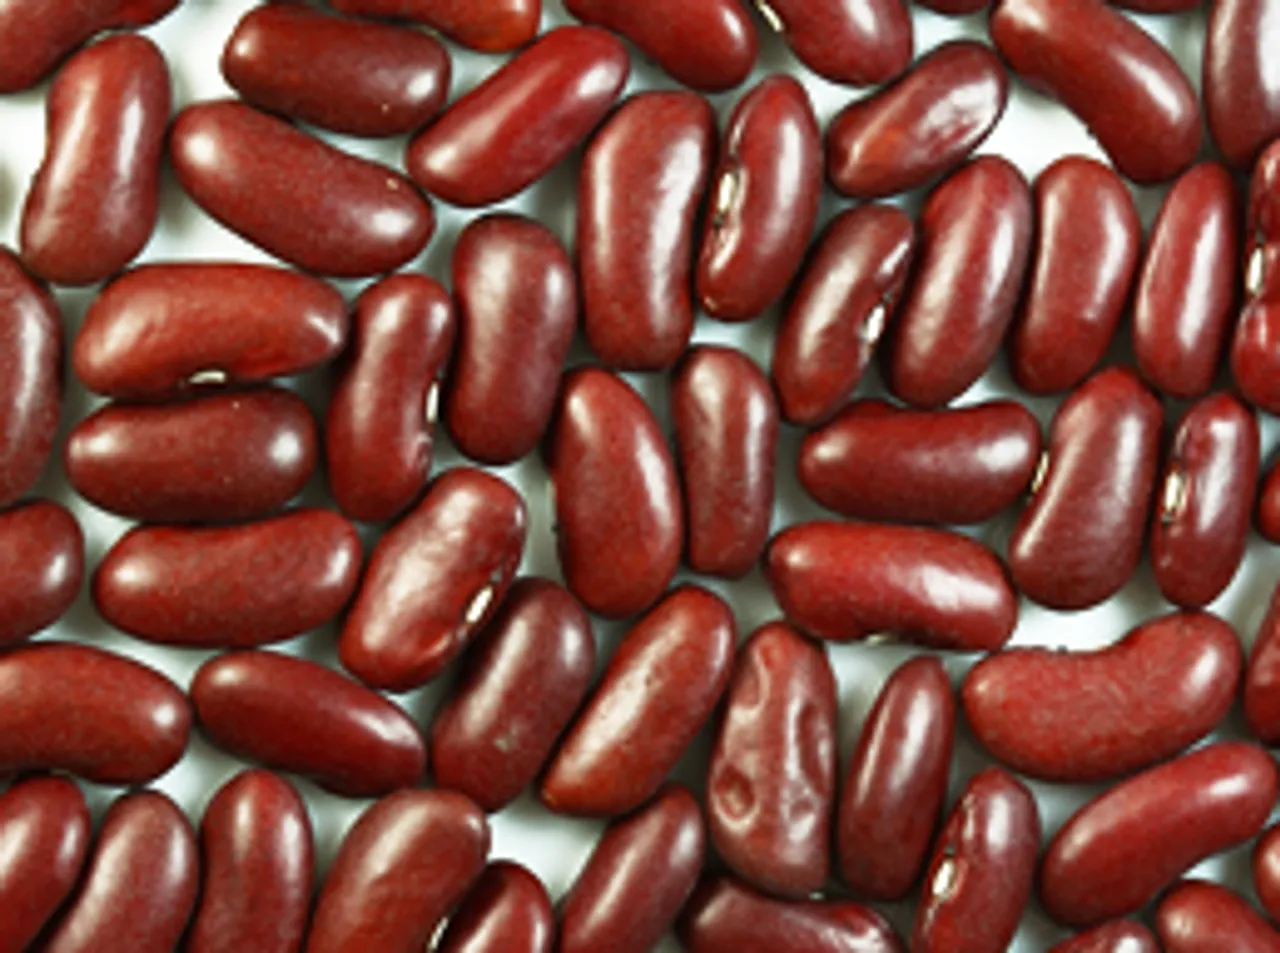 Red and tasty thats rajma for you